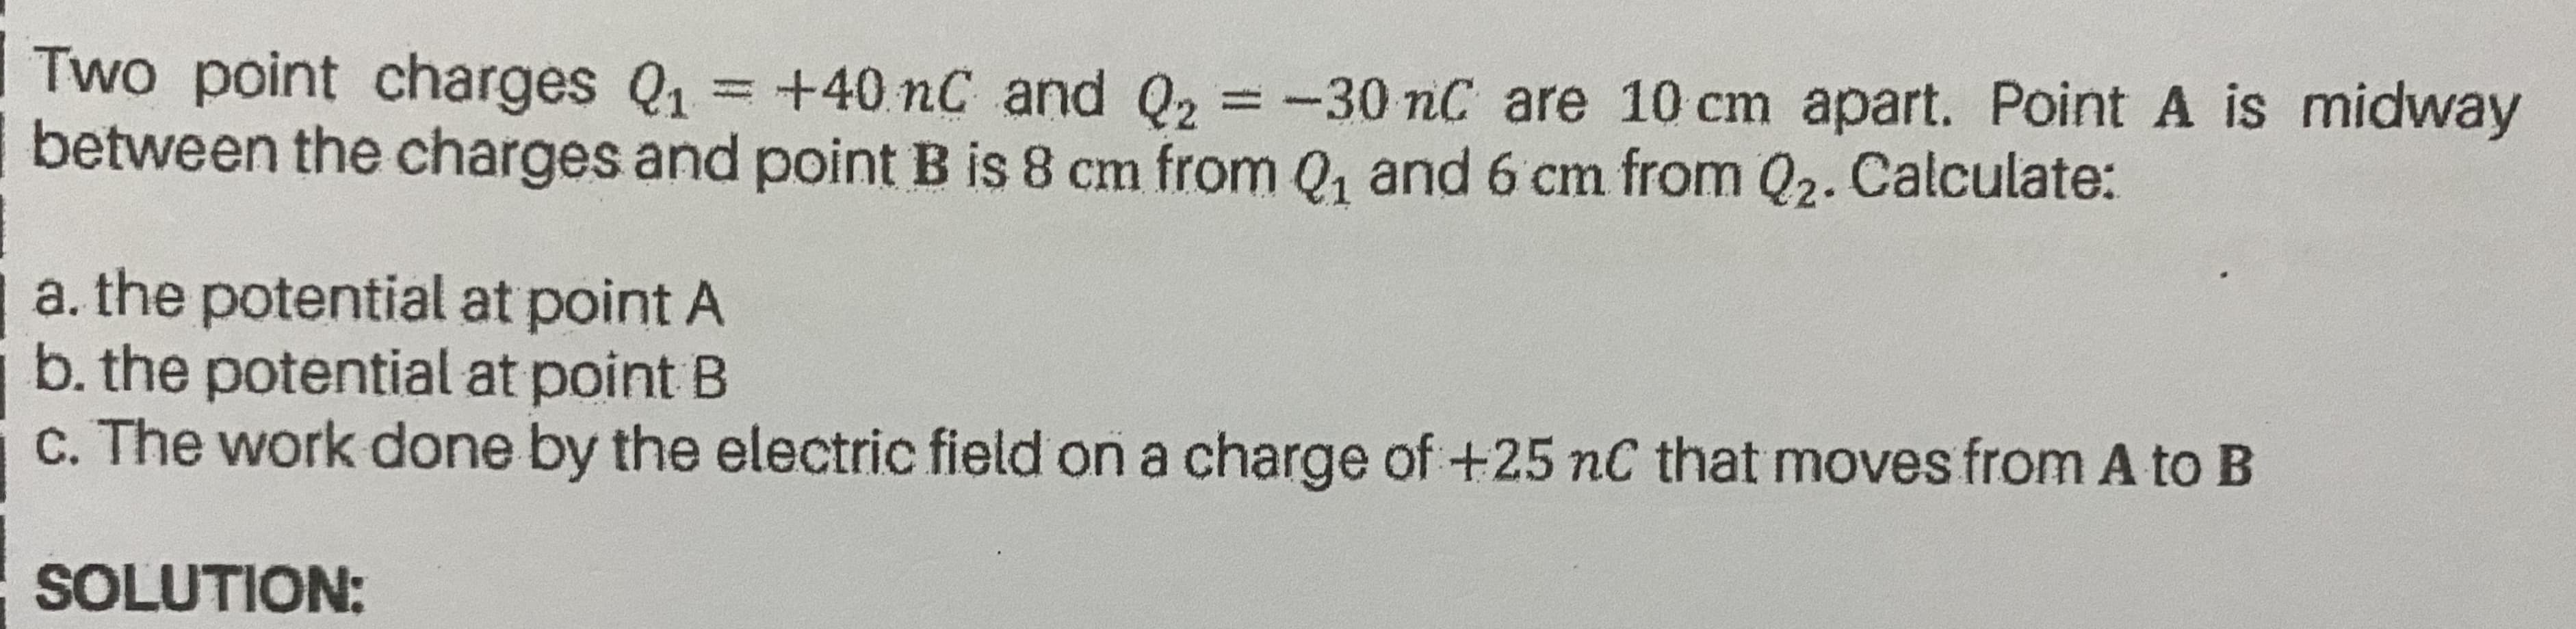 Two point charges Q1
between the charges and point B is 8 cm from Q, and 6 cm from Q2. Calculate:
= +40 nC and Q2 = -30 nC are 10 cm apart. Point A is midway
%3D
a. the potential at point A
b. the potential at point B
C. The work done by the electric field on a charge of+25 nC that moves from A to B
